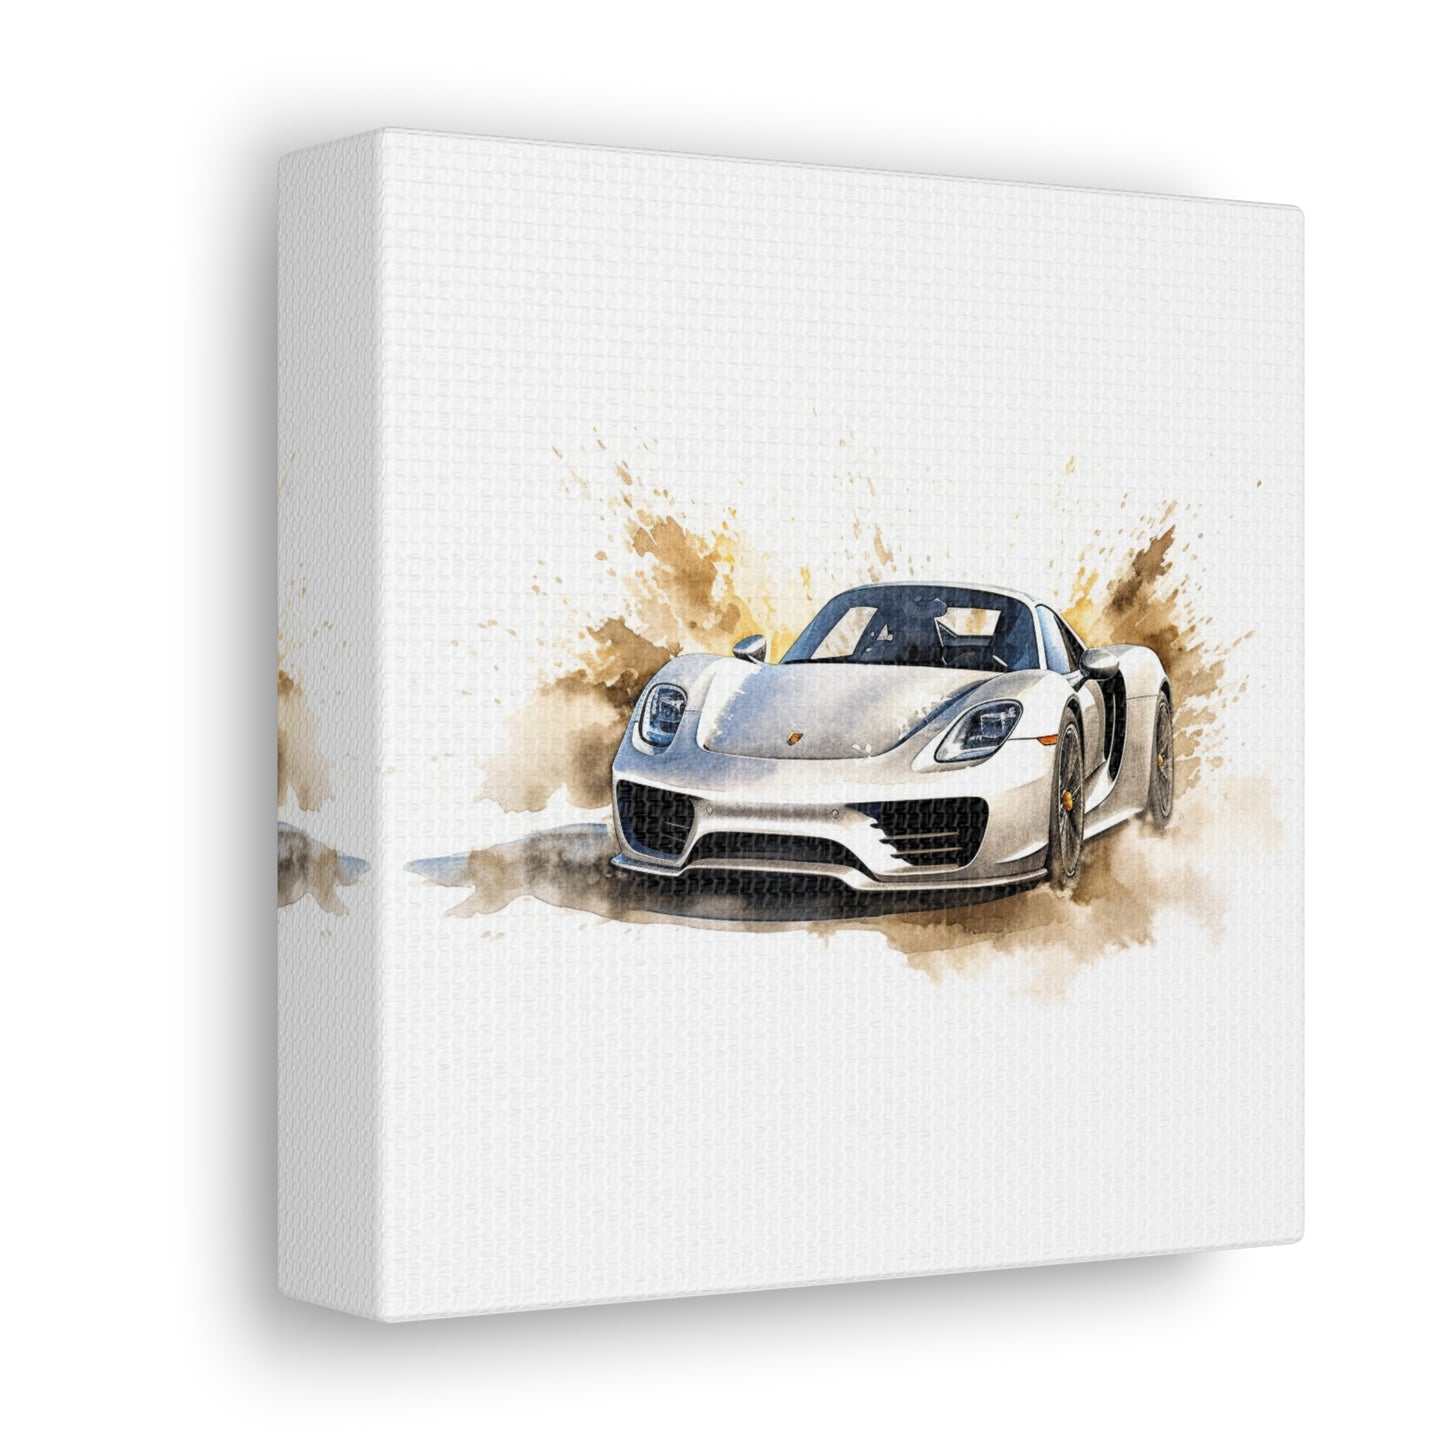 Canvas Gallery Wraps 918 Spyder with white background driving fast on water 2